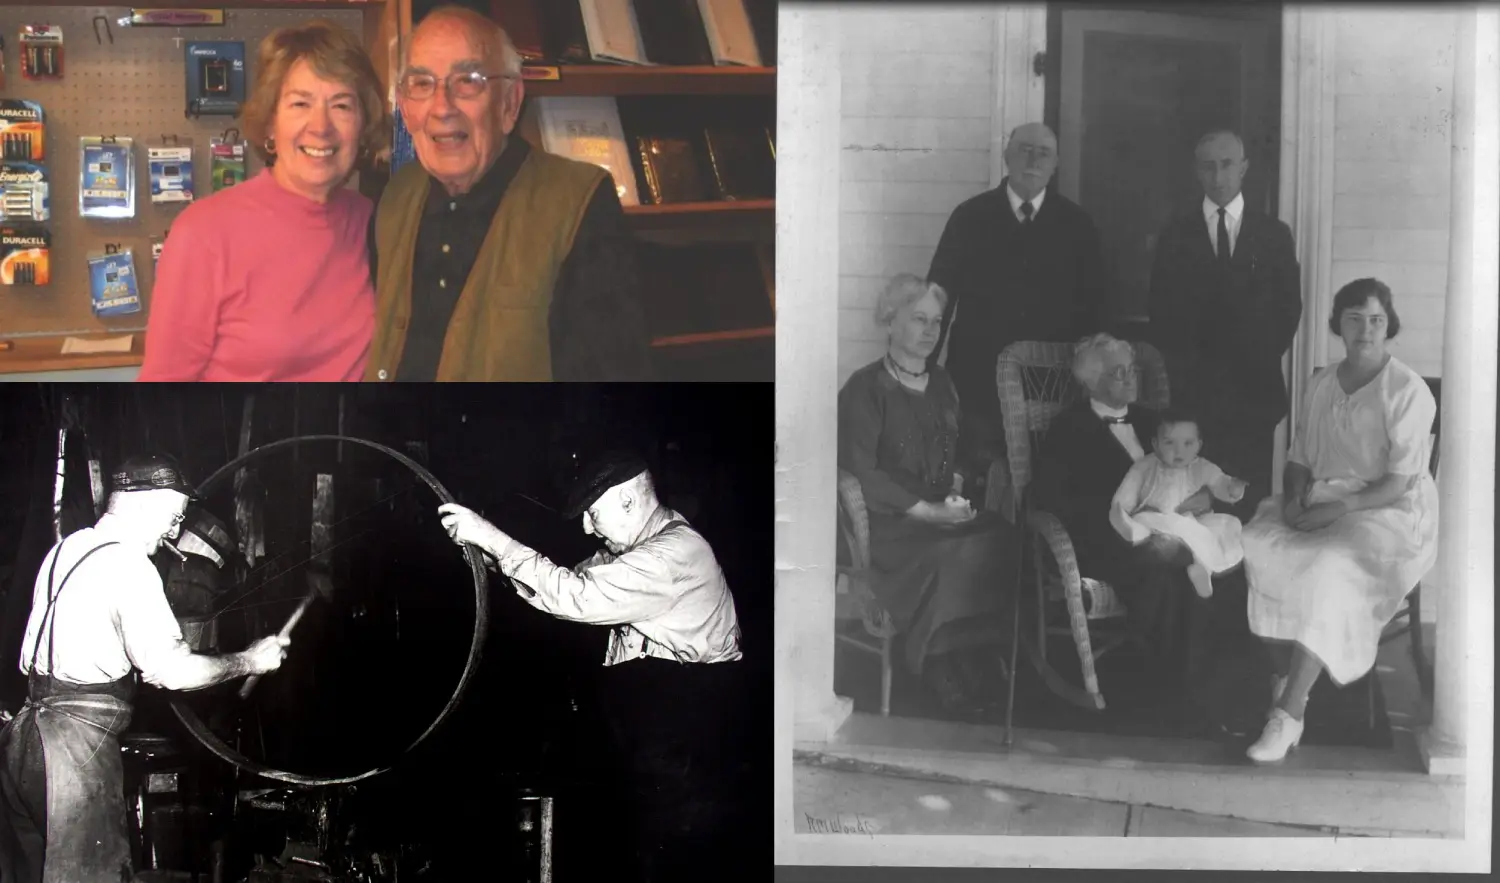 A collage of old photographs with people in the background.